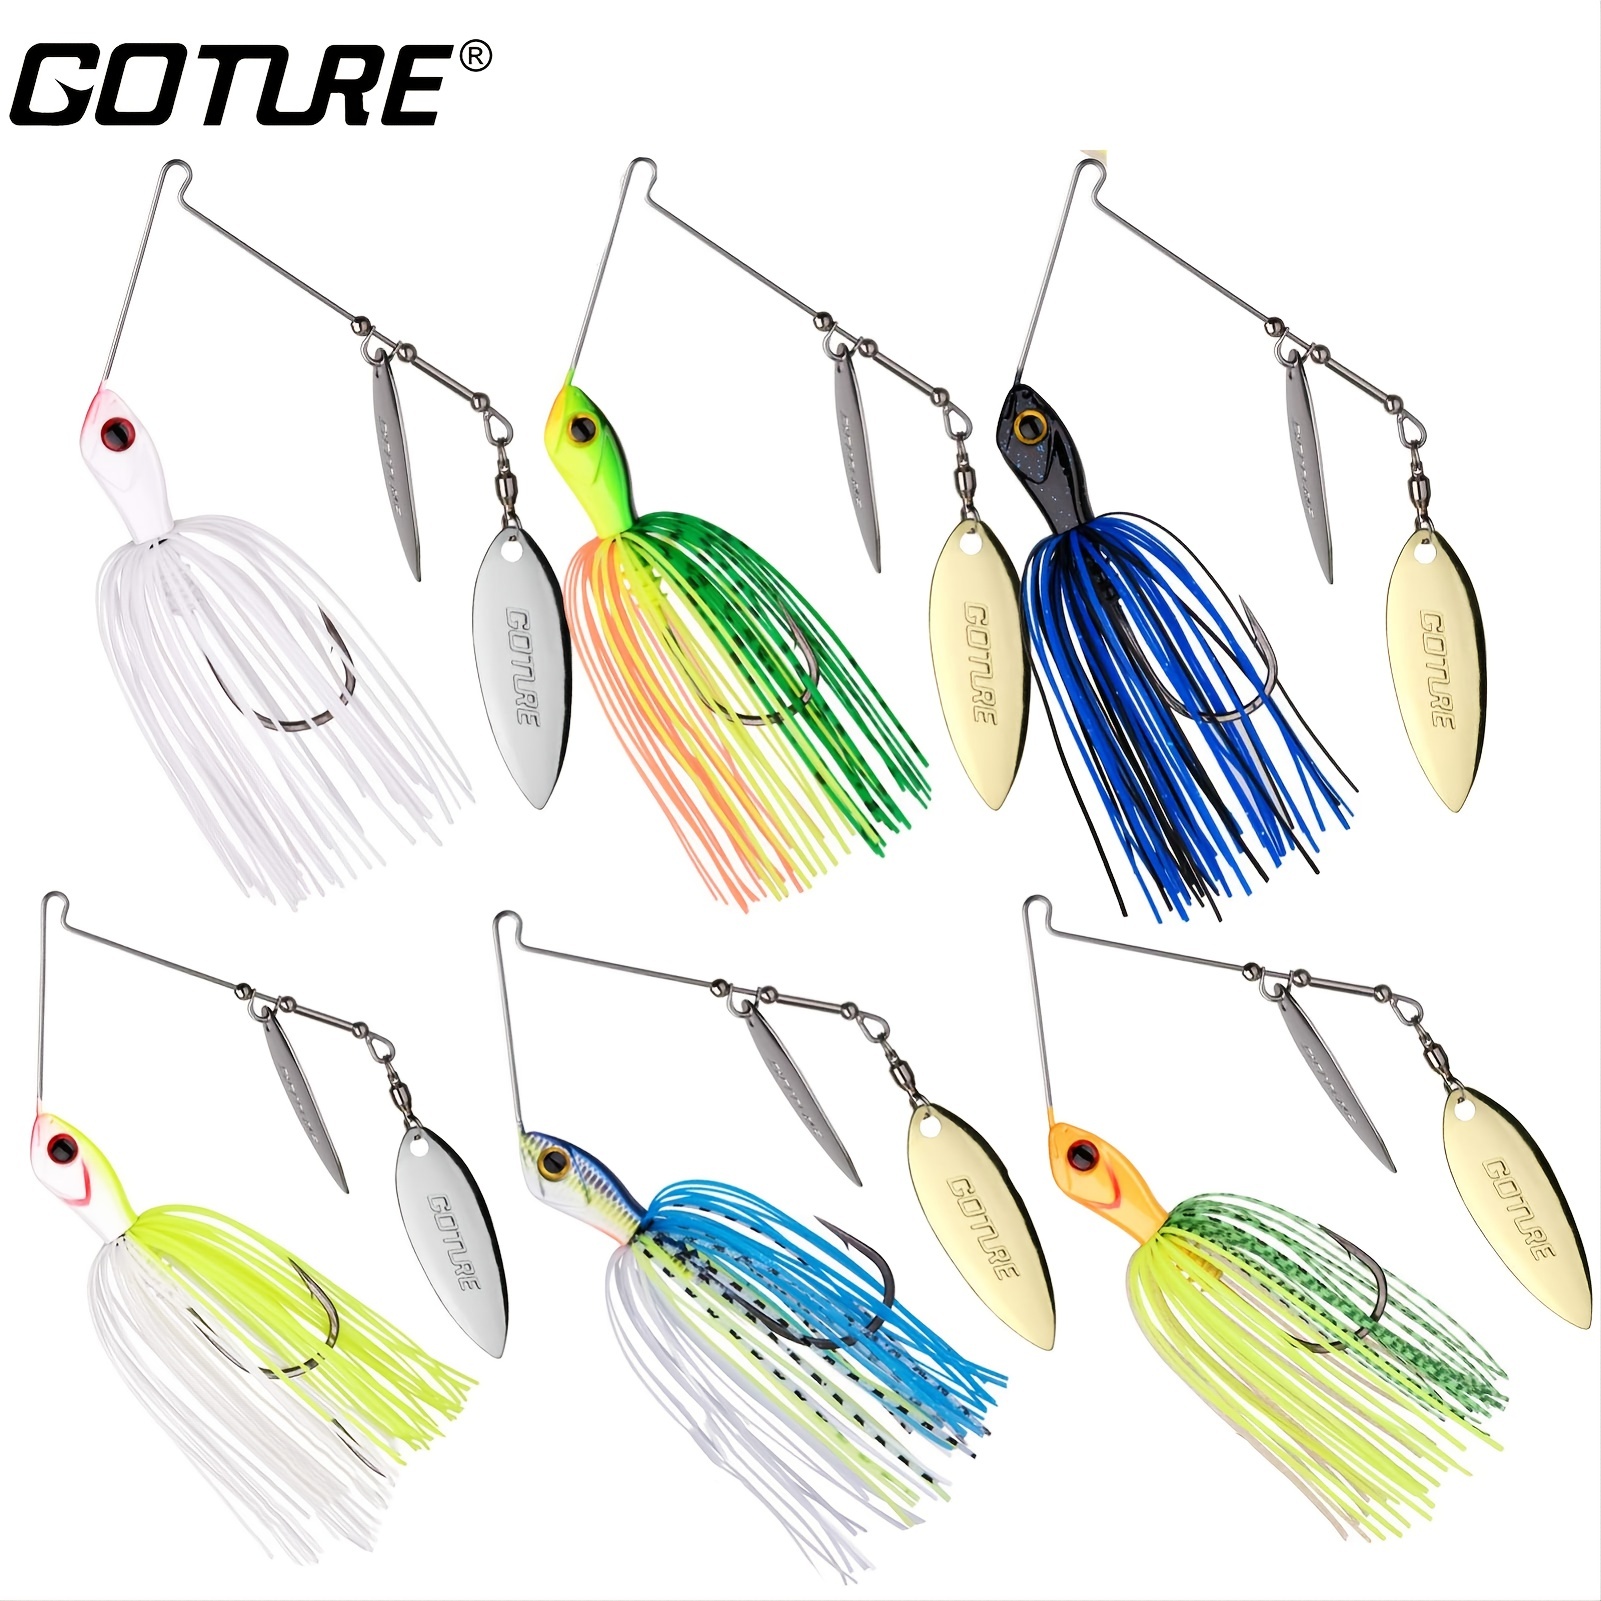 MNFT 20 pcs/lot Large Soft Rubber Squid Skirts Octopus Lure Jigs Big Soft  Lures for Sea Fishing